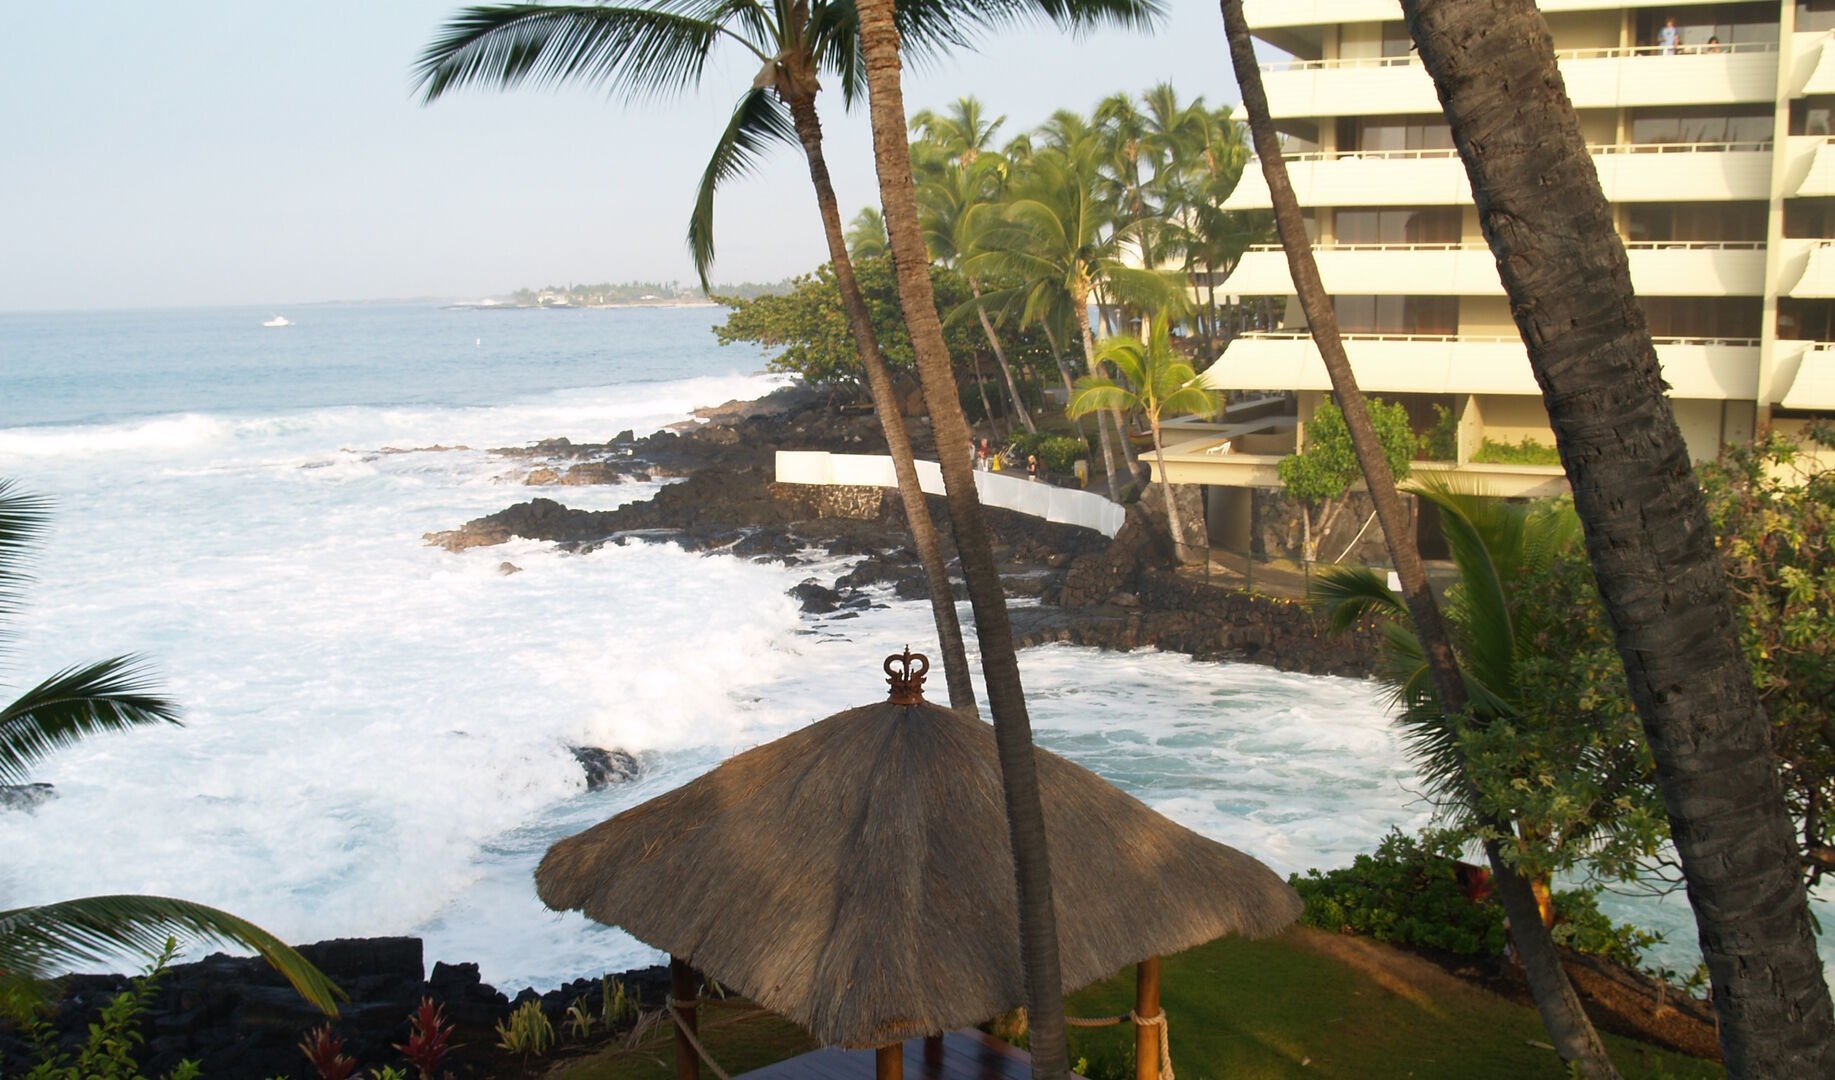 Waves coming into the lagoon as seen from your lanai.